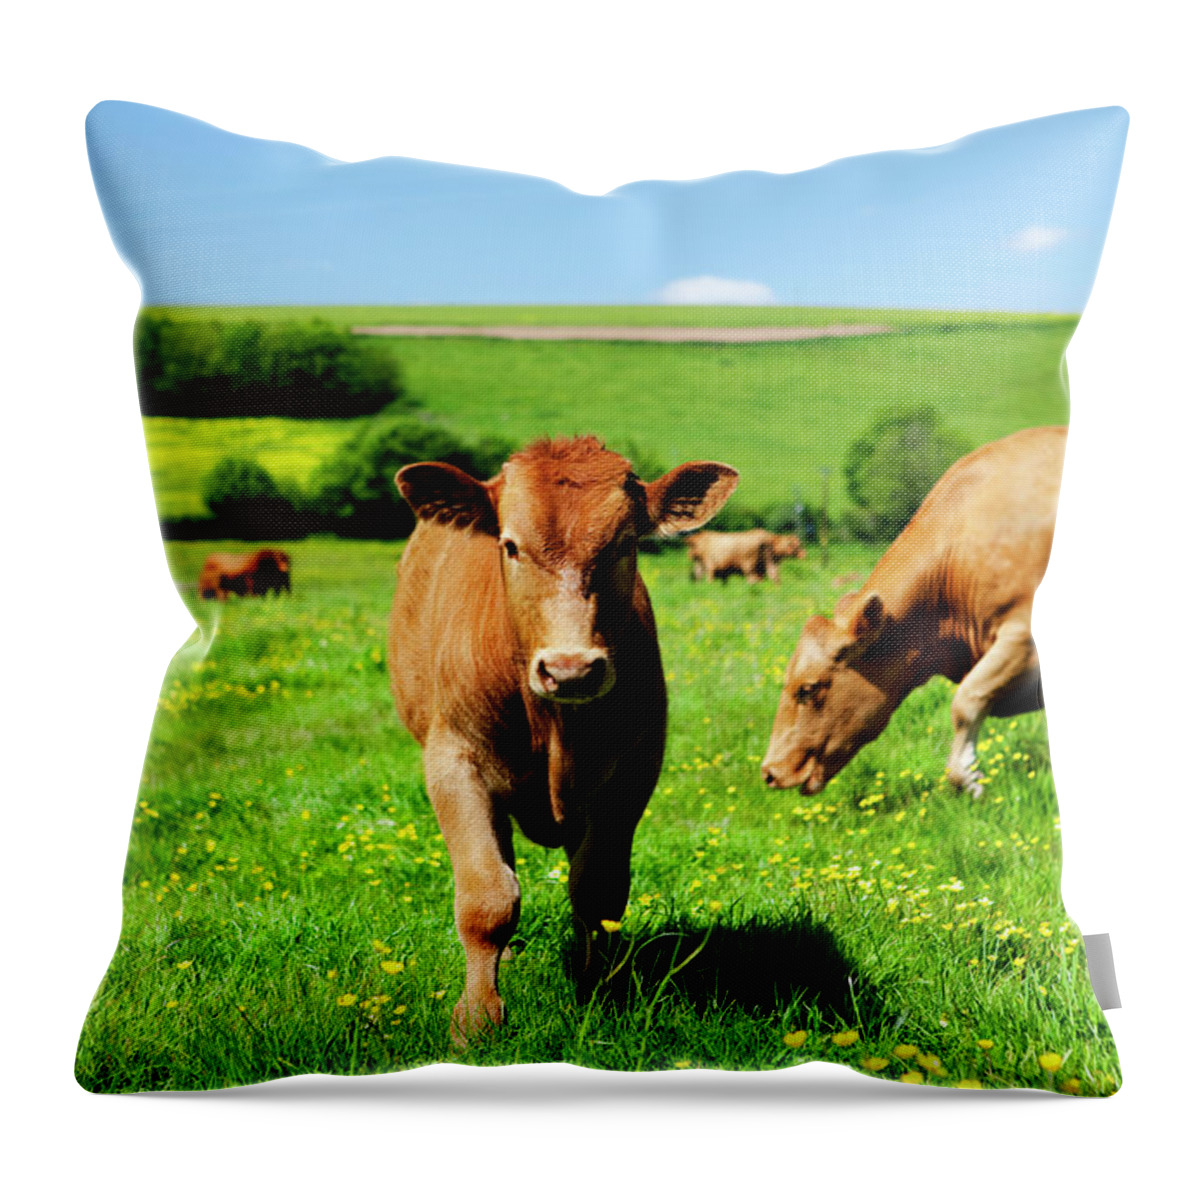 Domestic Animals Throw Pillow featuring the photograph Cows And Buttercups by Lockiecurrie